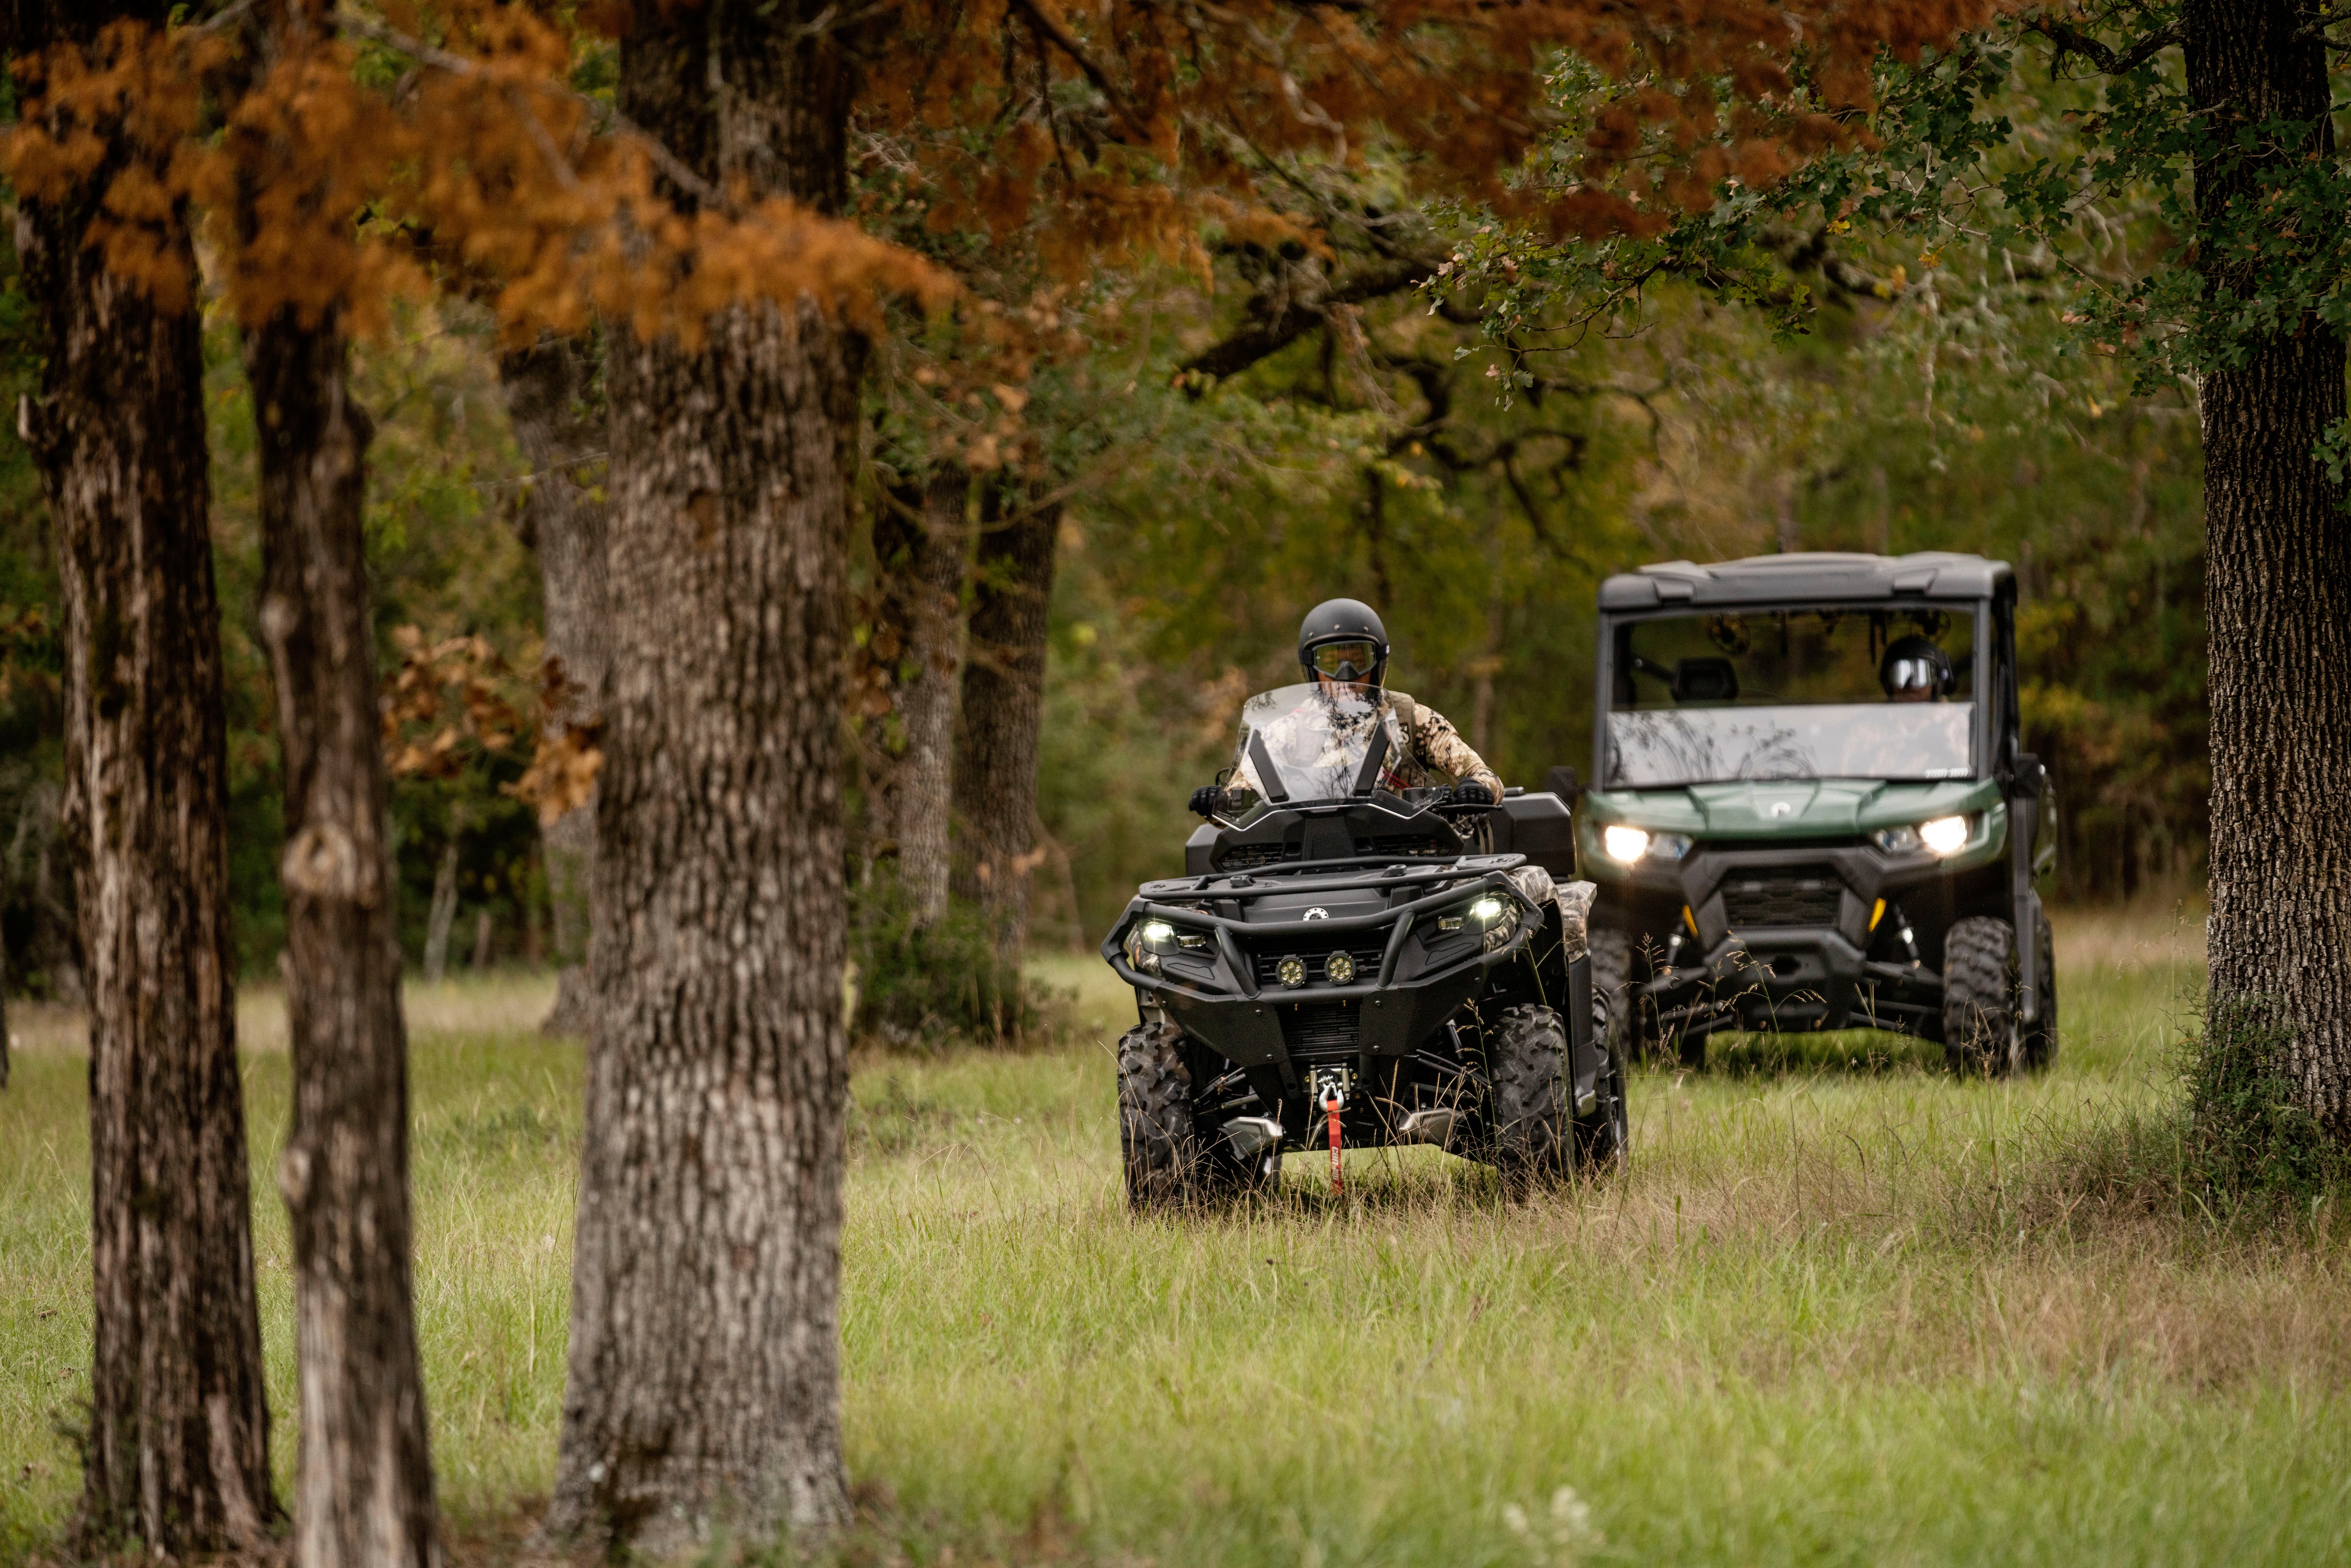 A Can-Am Defender driving behind a Can-Am Outlander PRO Hunting Edition on a hunt